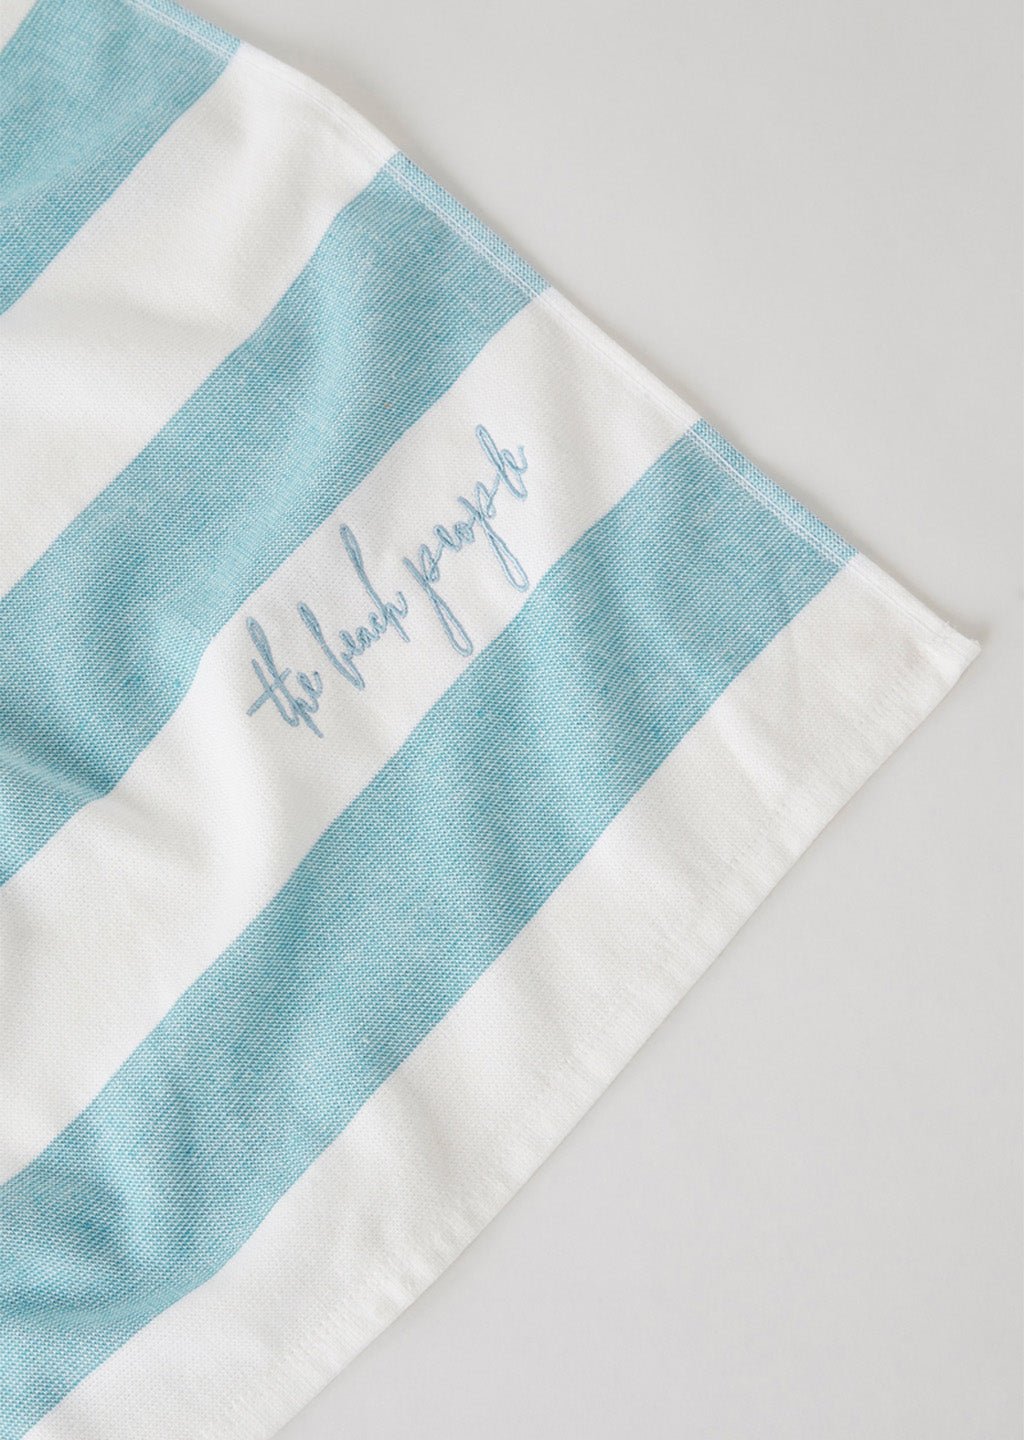 The Beach People Kids Sky Blue Sand-free Beach towel with personalization